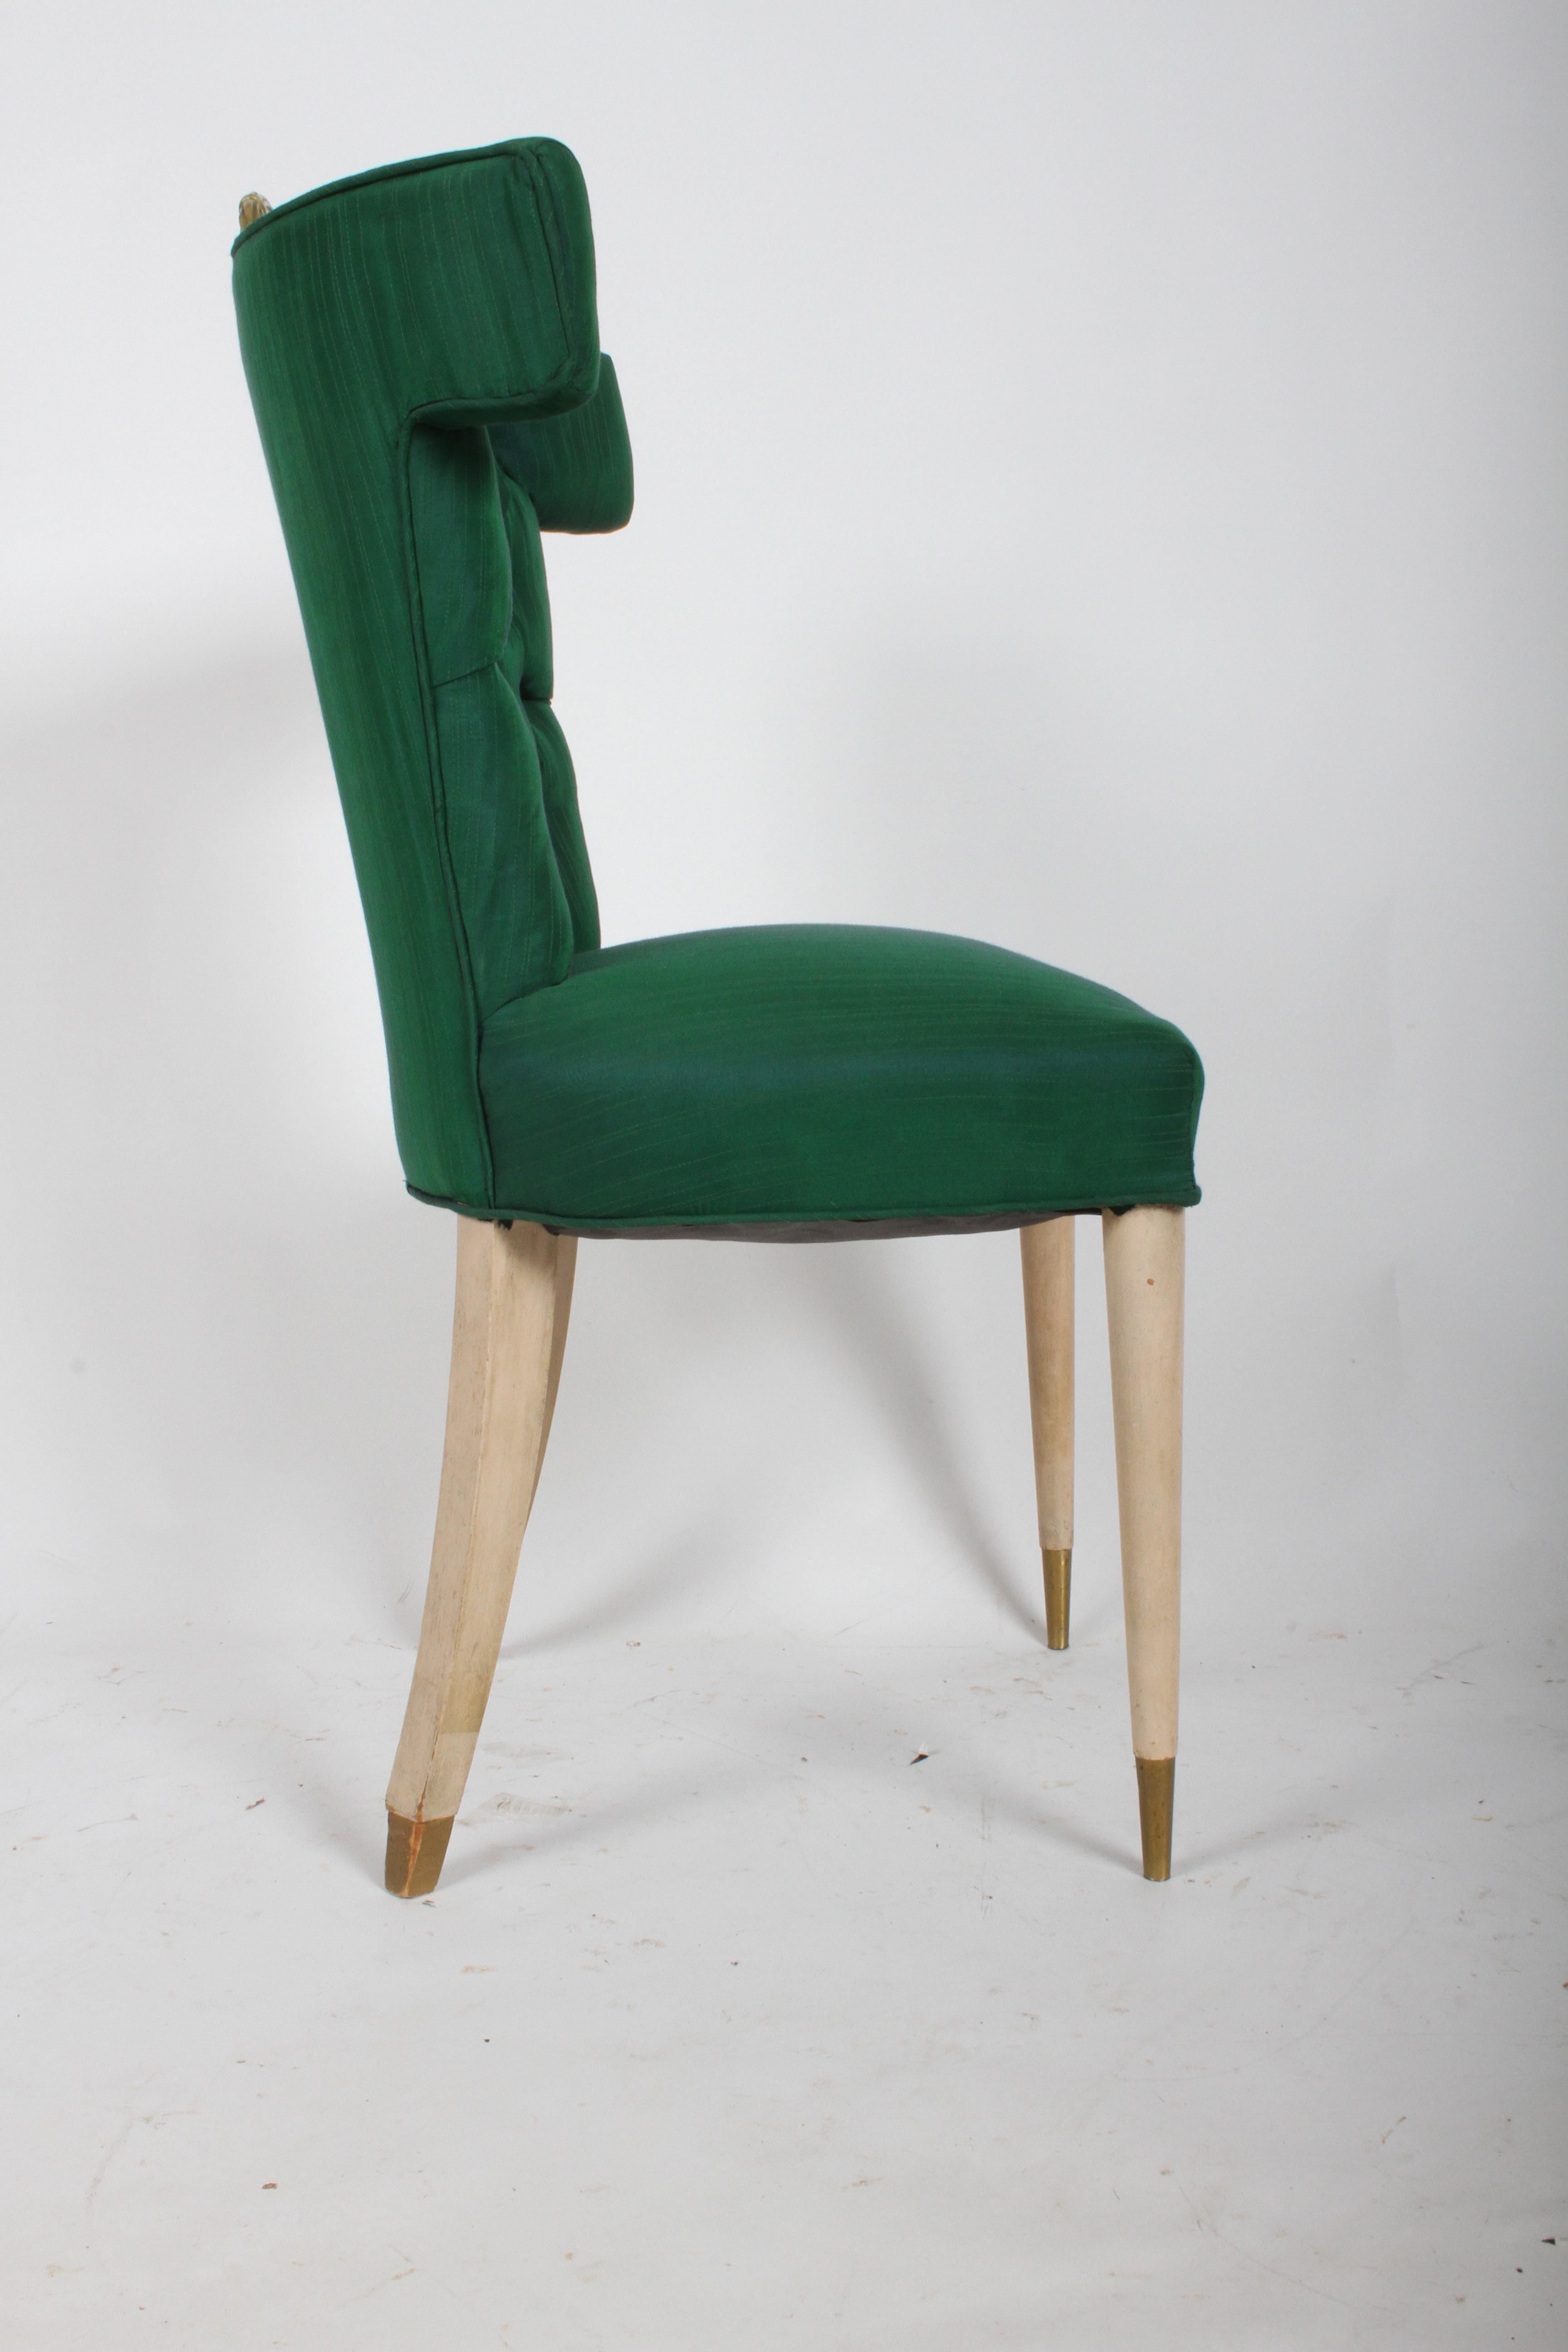 Satz von 6 1940s Hollywood Regency Tufted Curved Back Dining Chair Messing Griffe  im Angebot 4